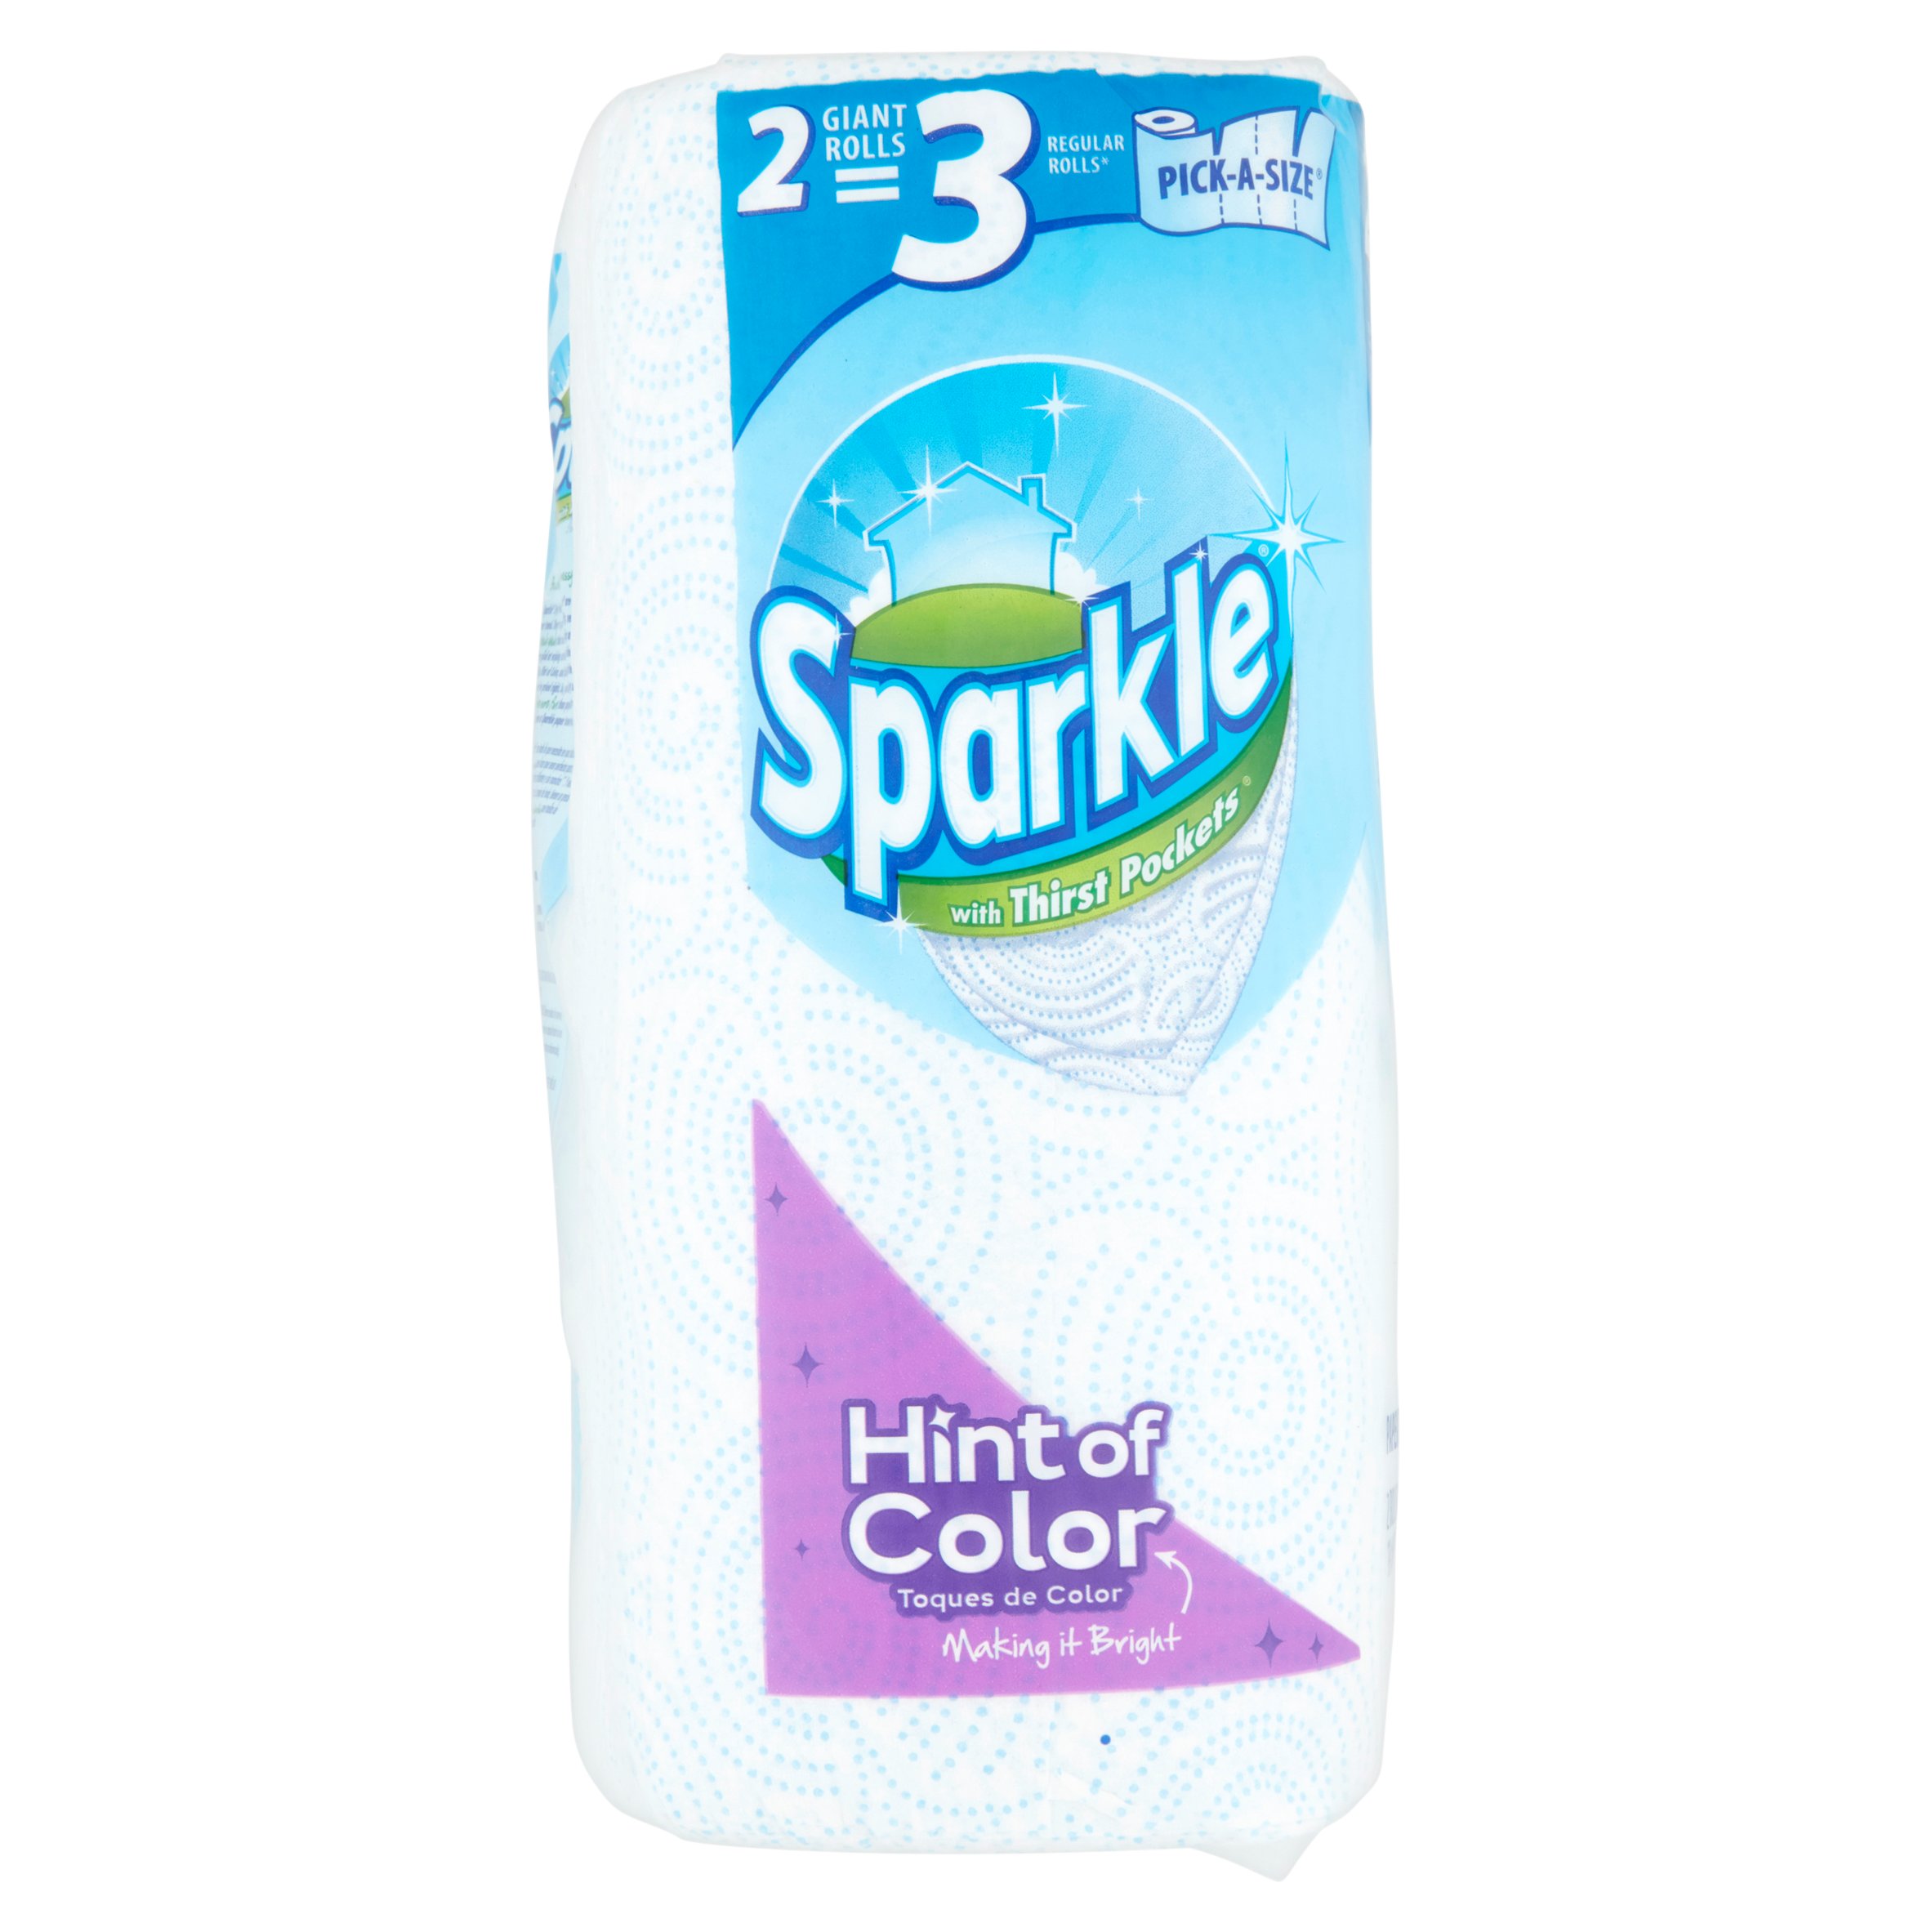 Sparkle Paper Towels with Thirst Pockets Rolls, 2 count - image 3 of 5